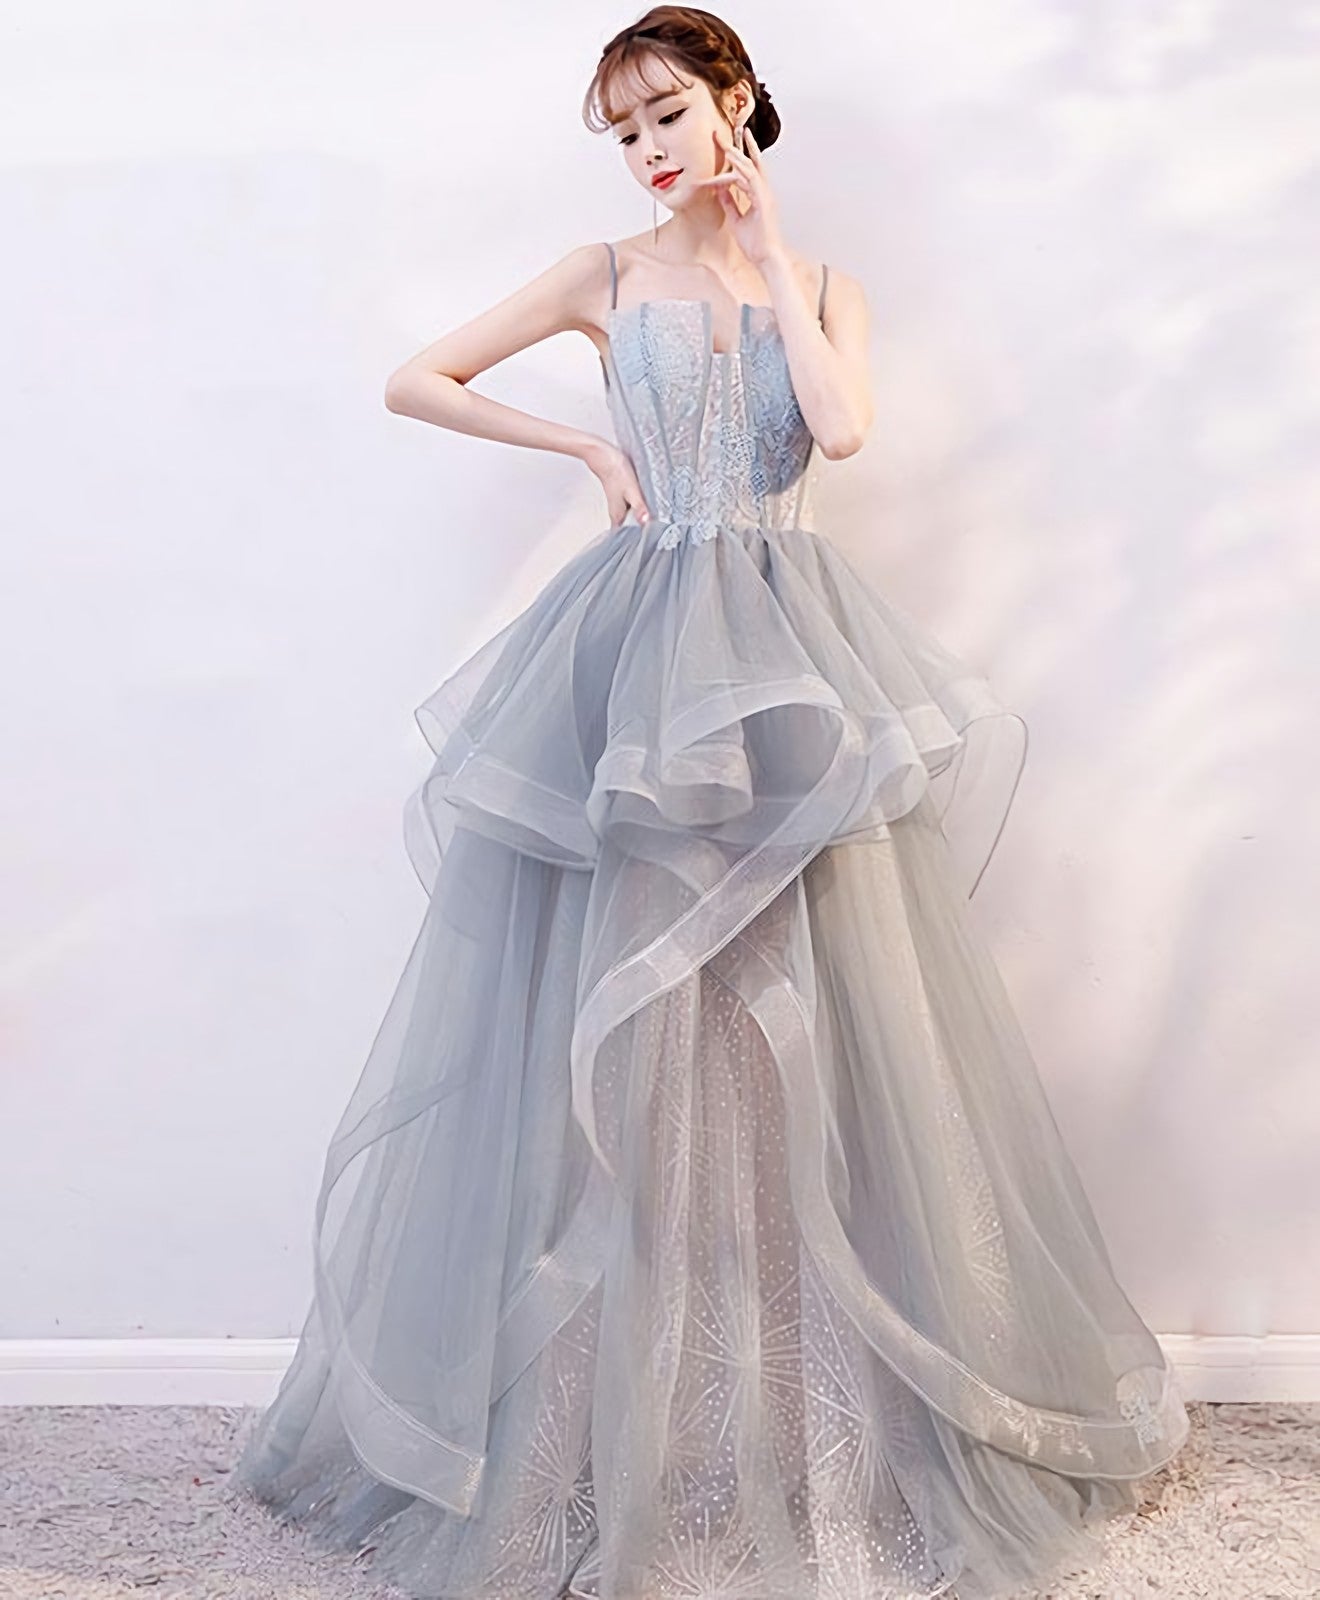 Gray Tulle Lace Long Prom Dress, Gray Tulle Lace Evening Dress, 2